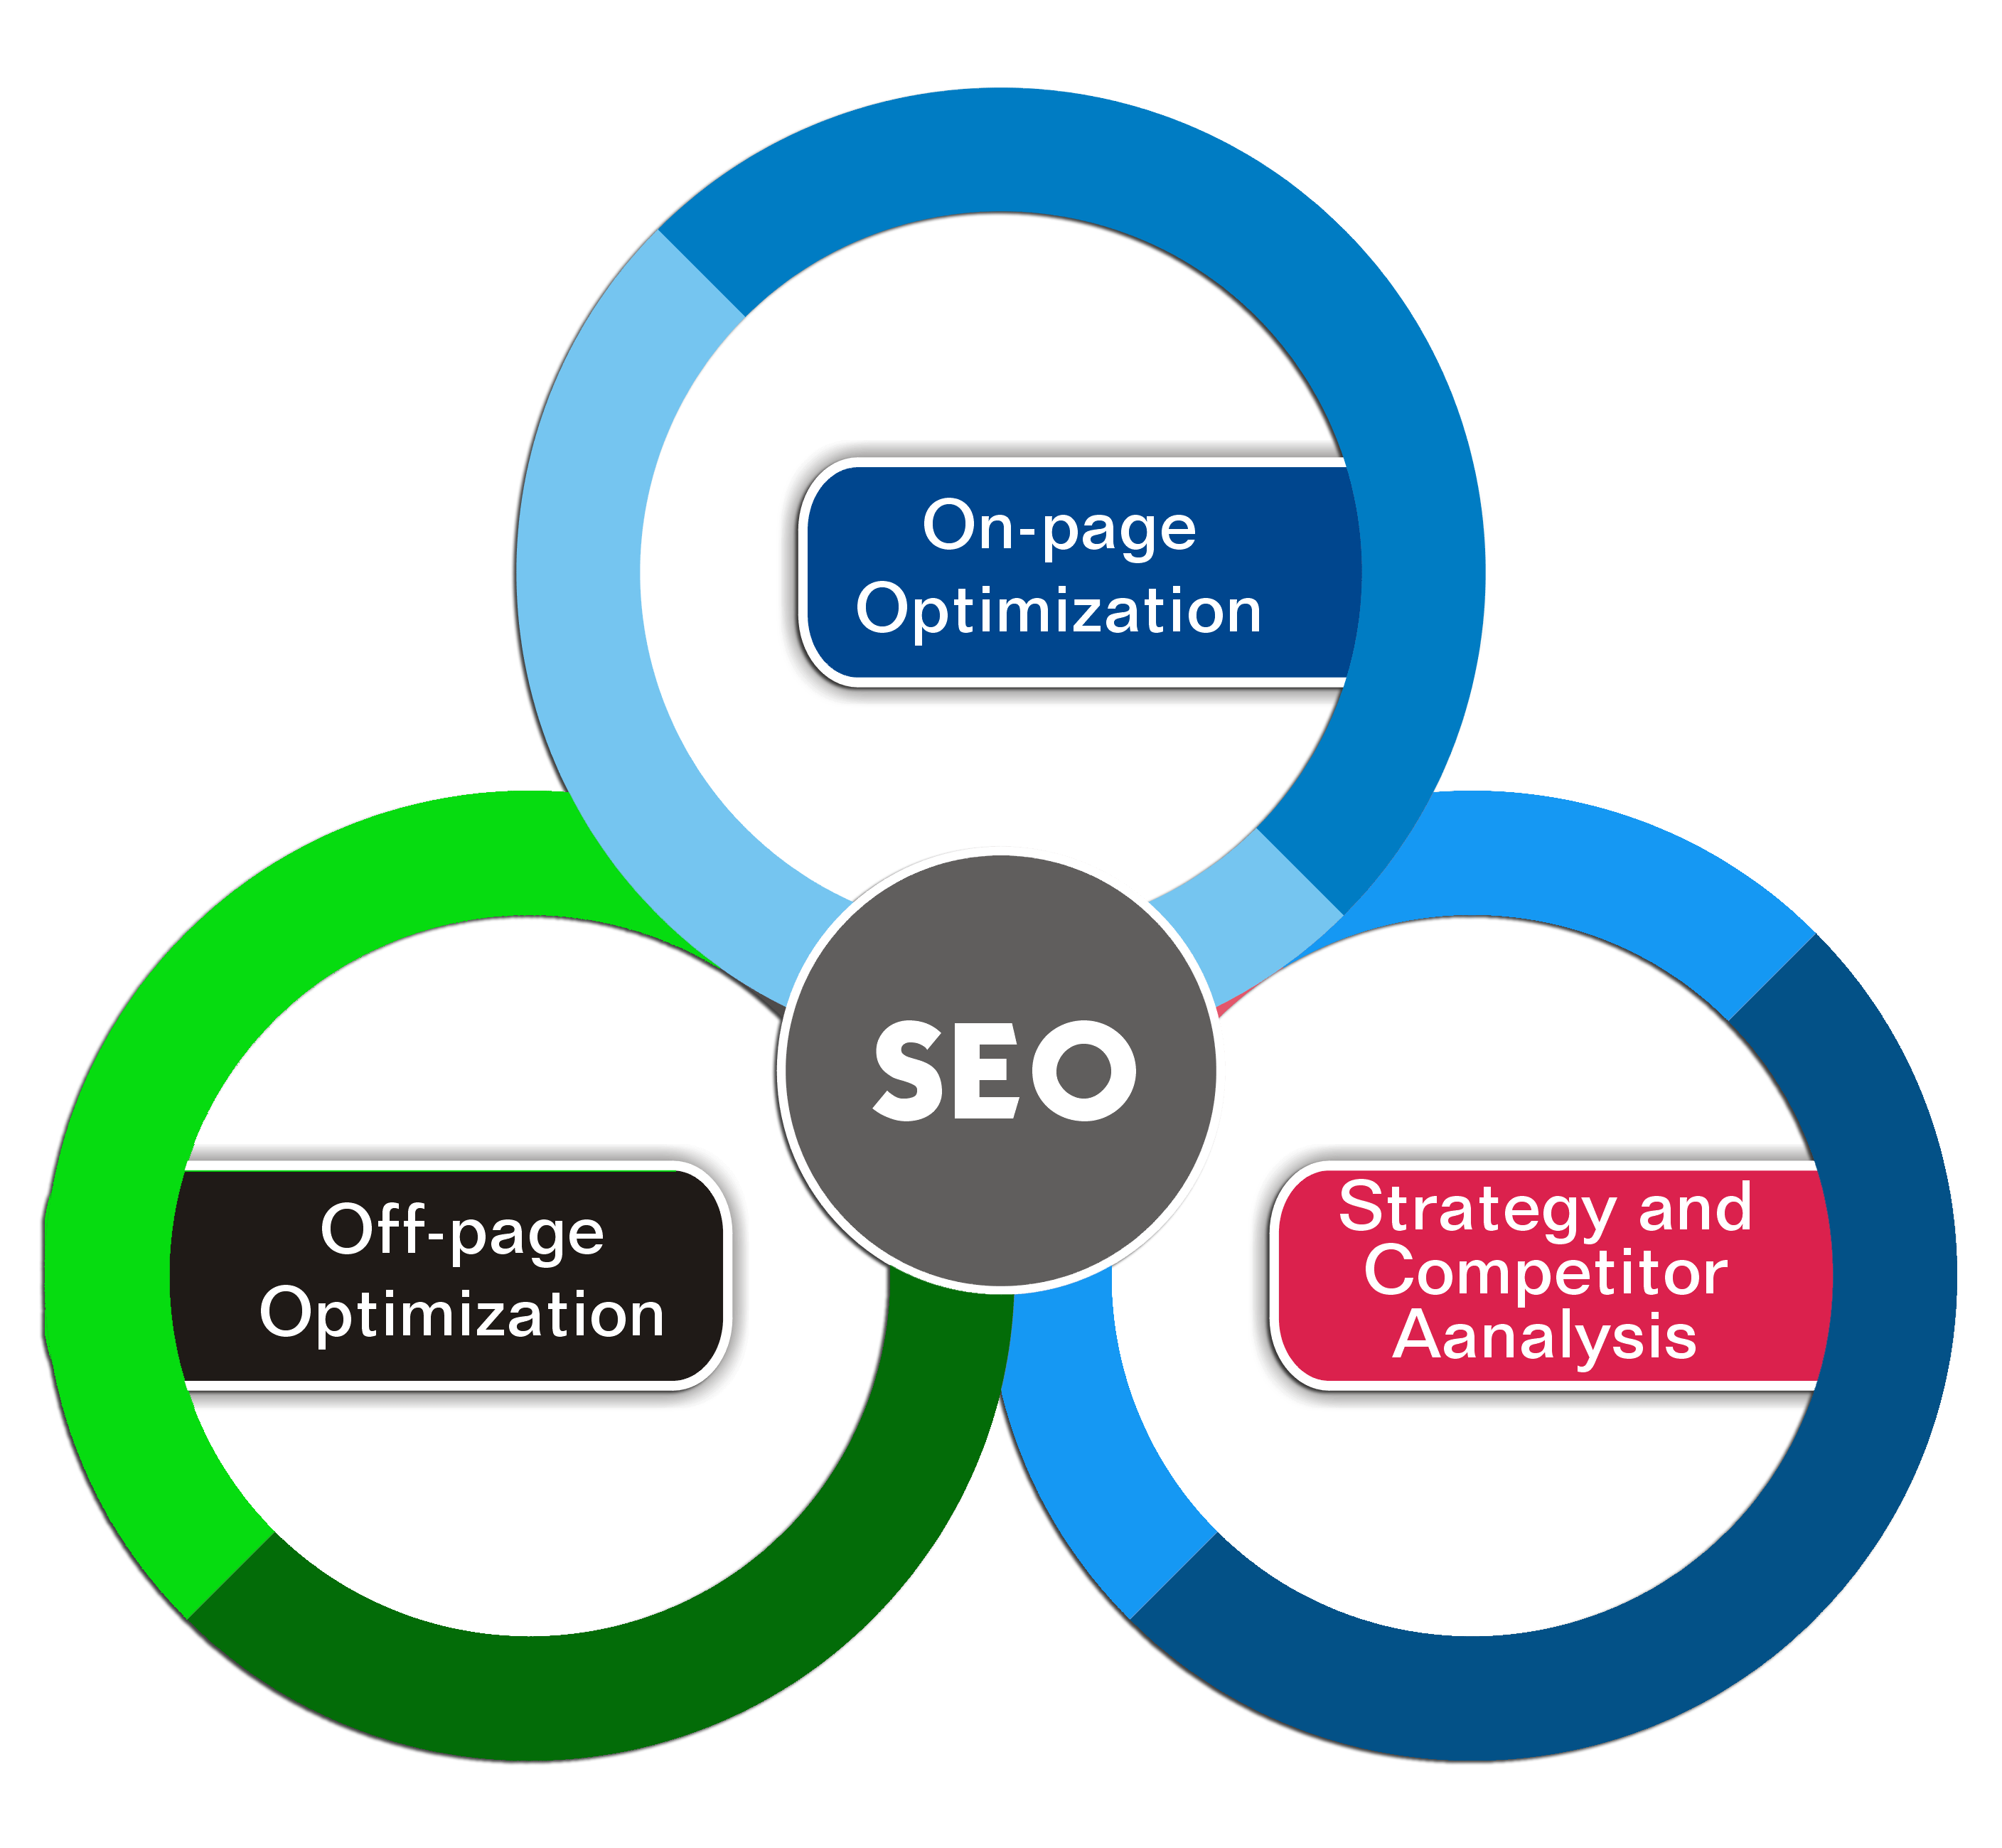 seo-packages